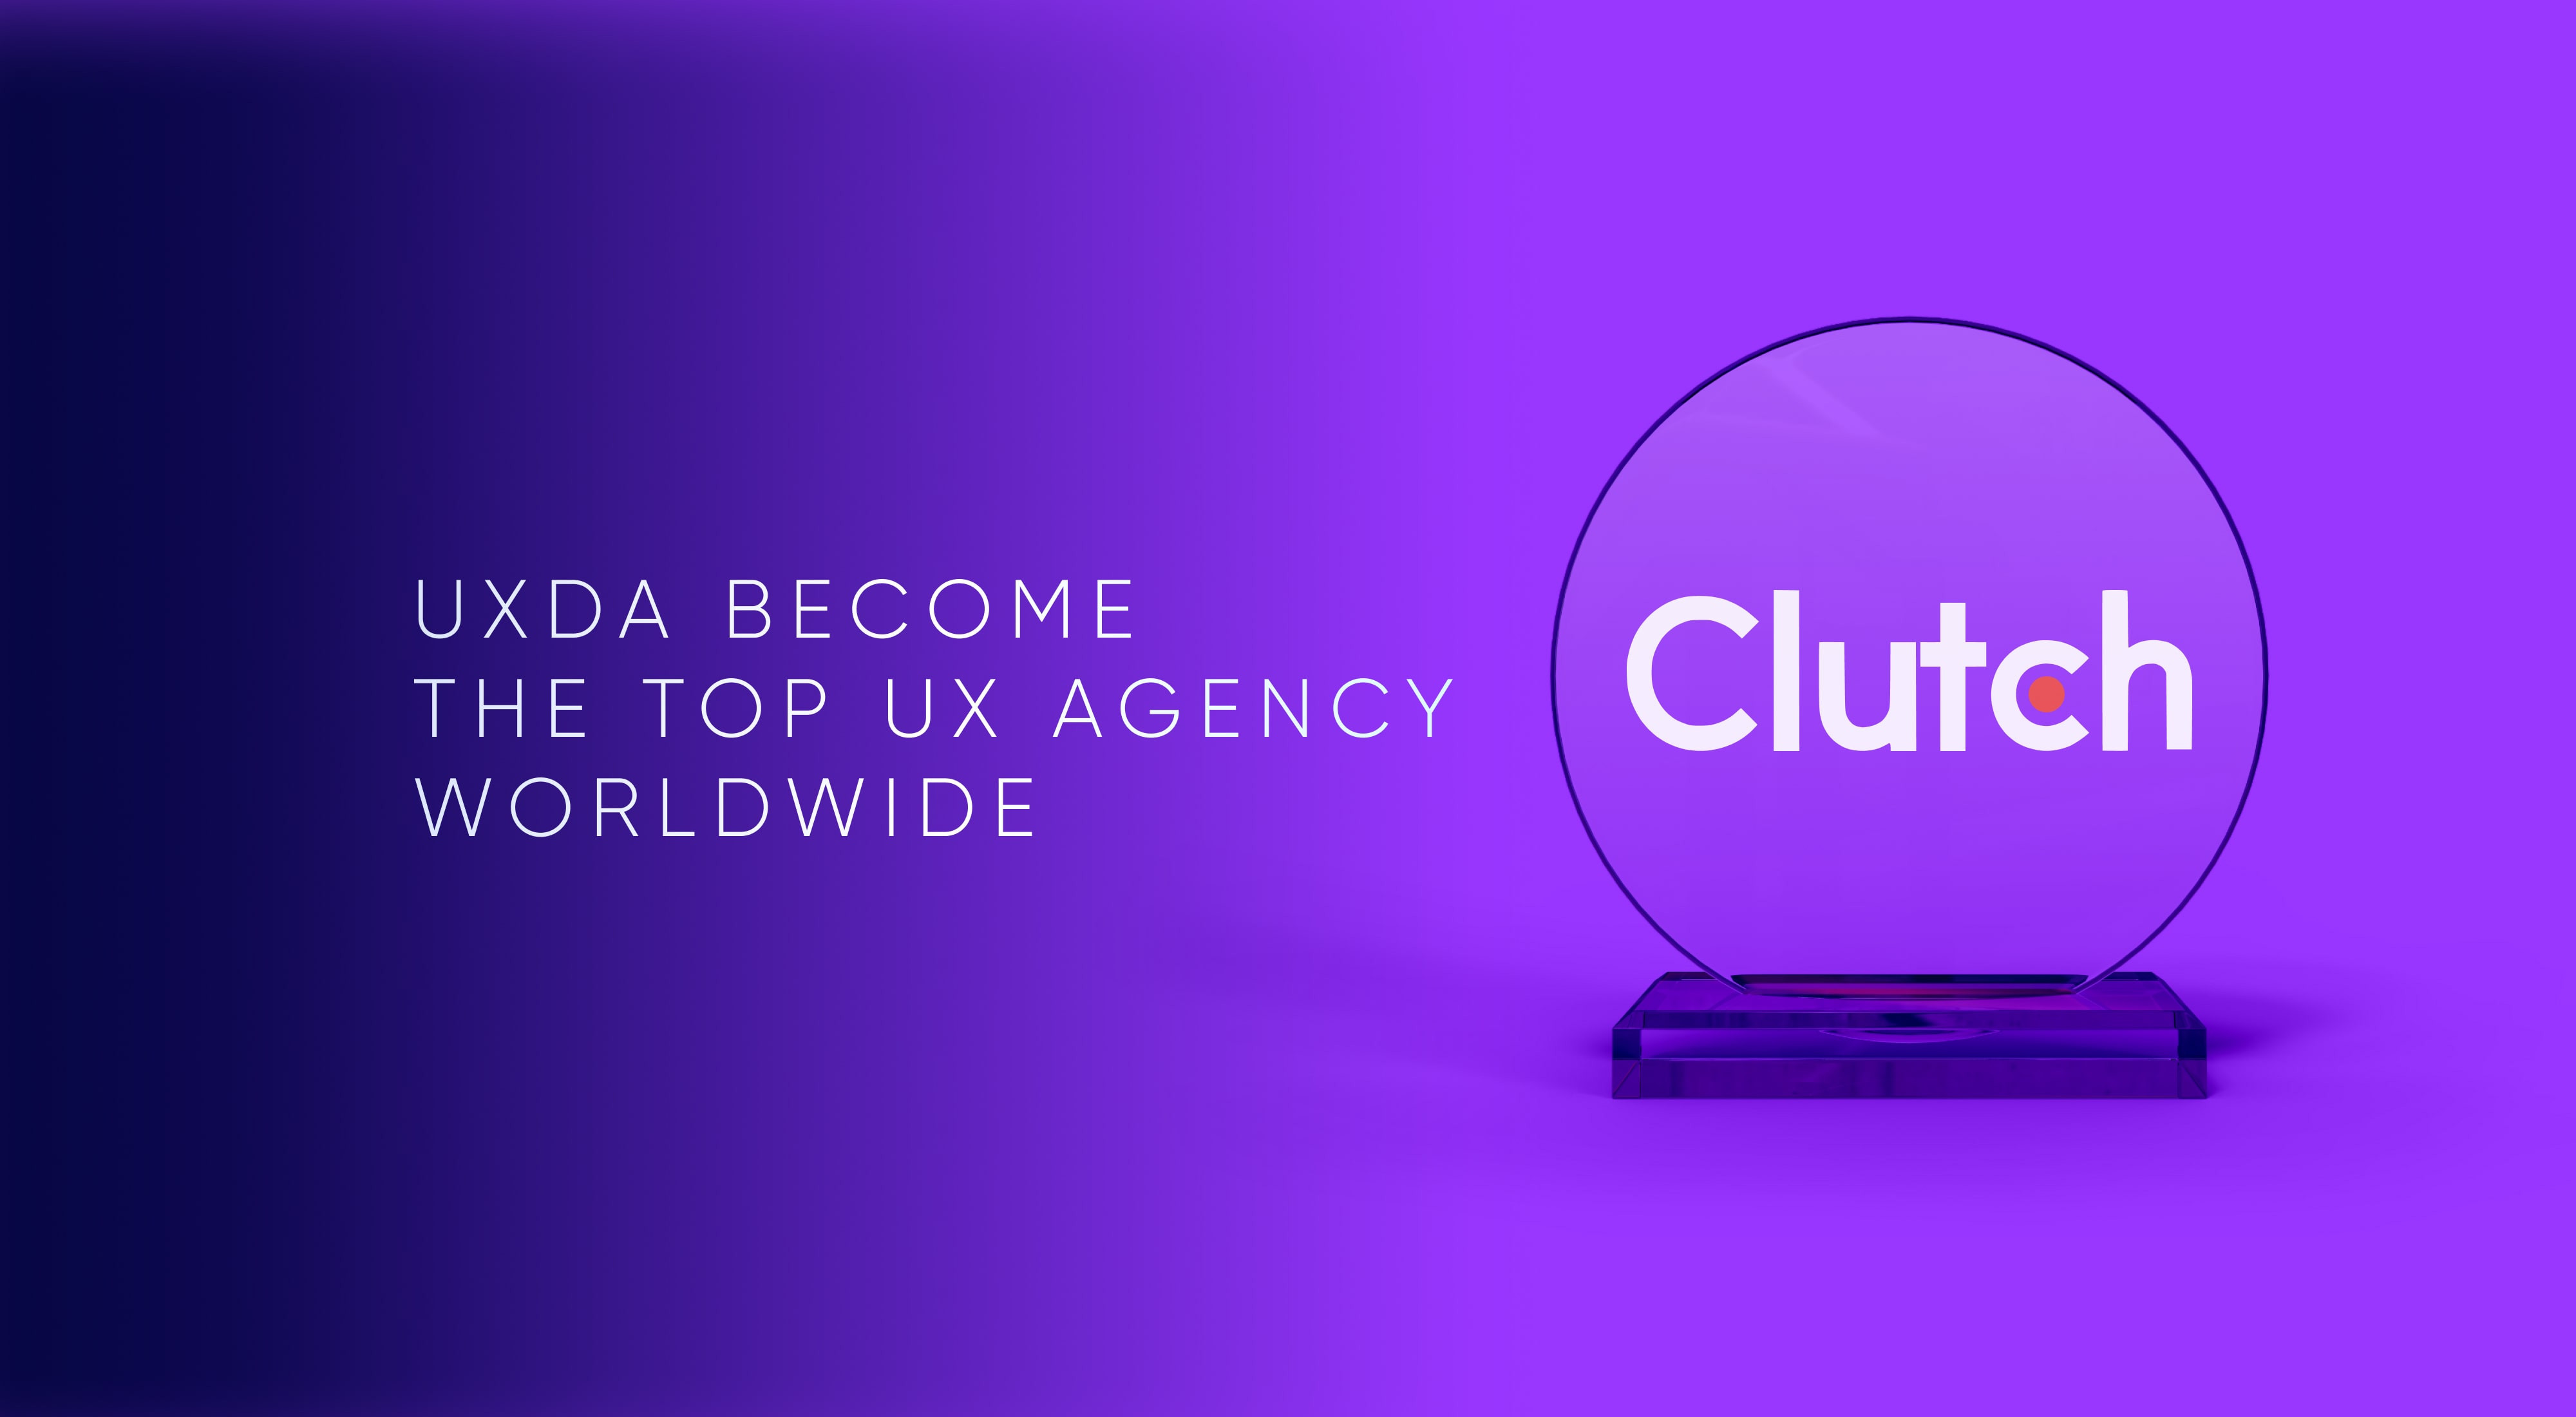 UXDA Becomes One of the Best UX Design Agencies in the World